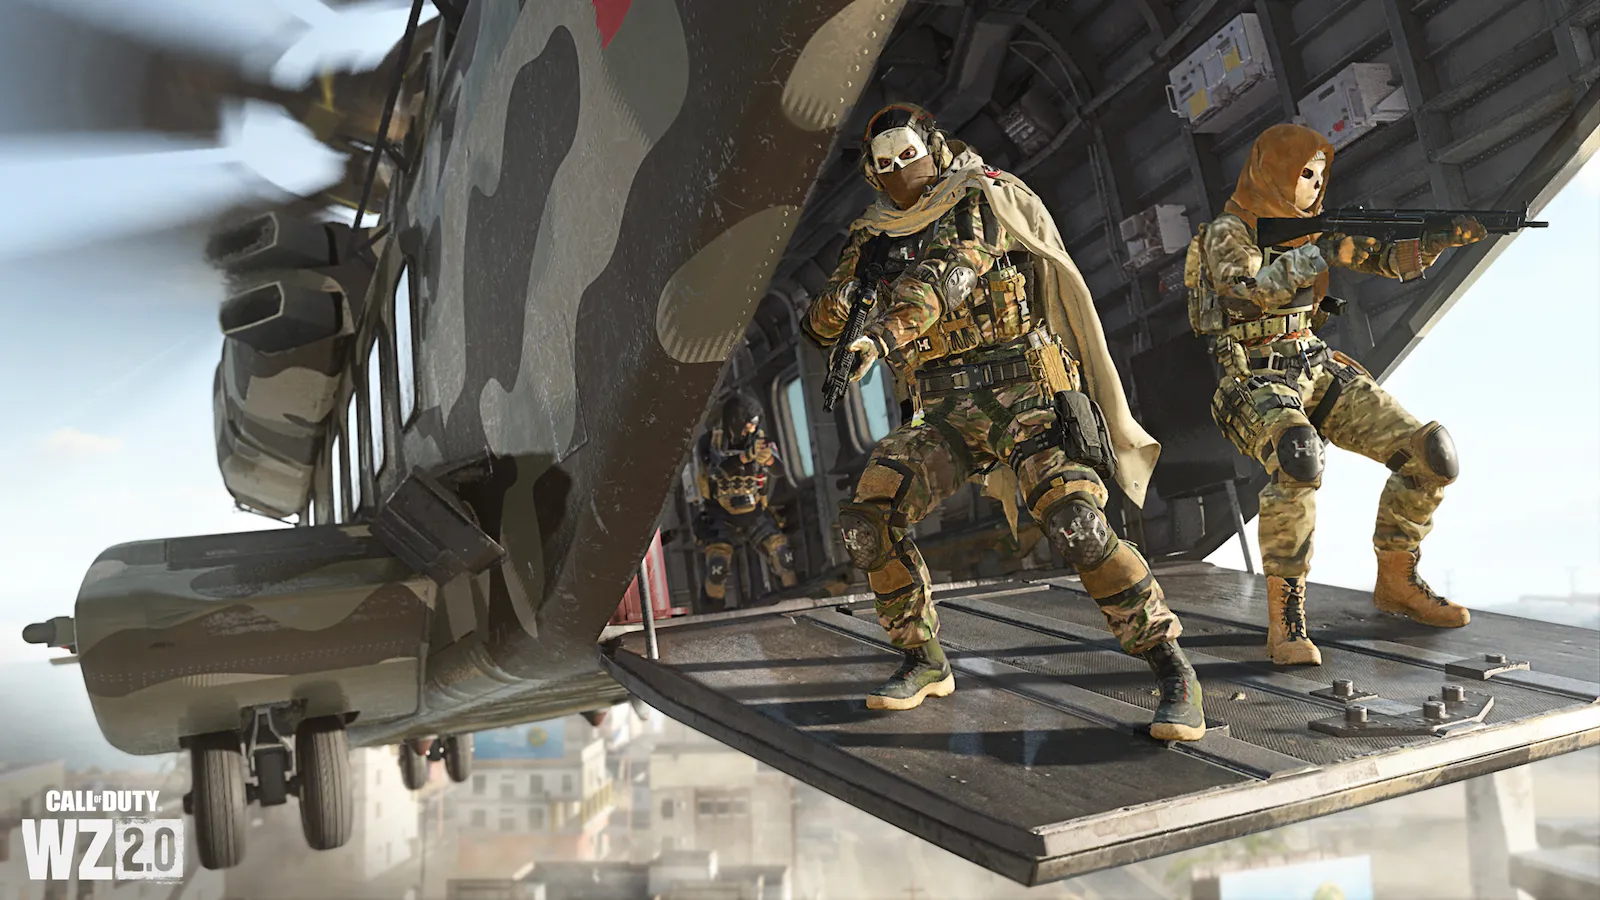 Call Of Duty: Modern Warfare 2' Destroys Records With $800 Million Opening  Weekend